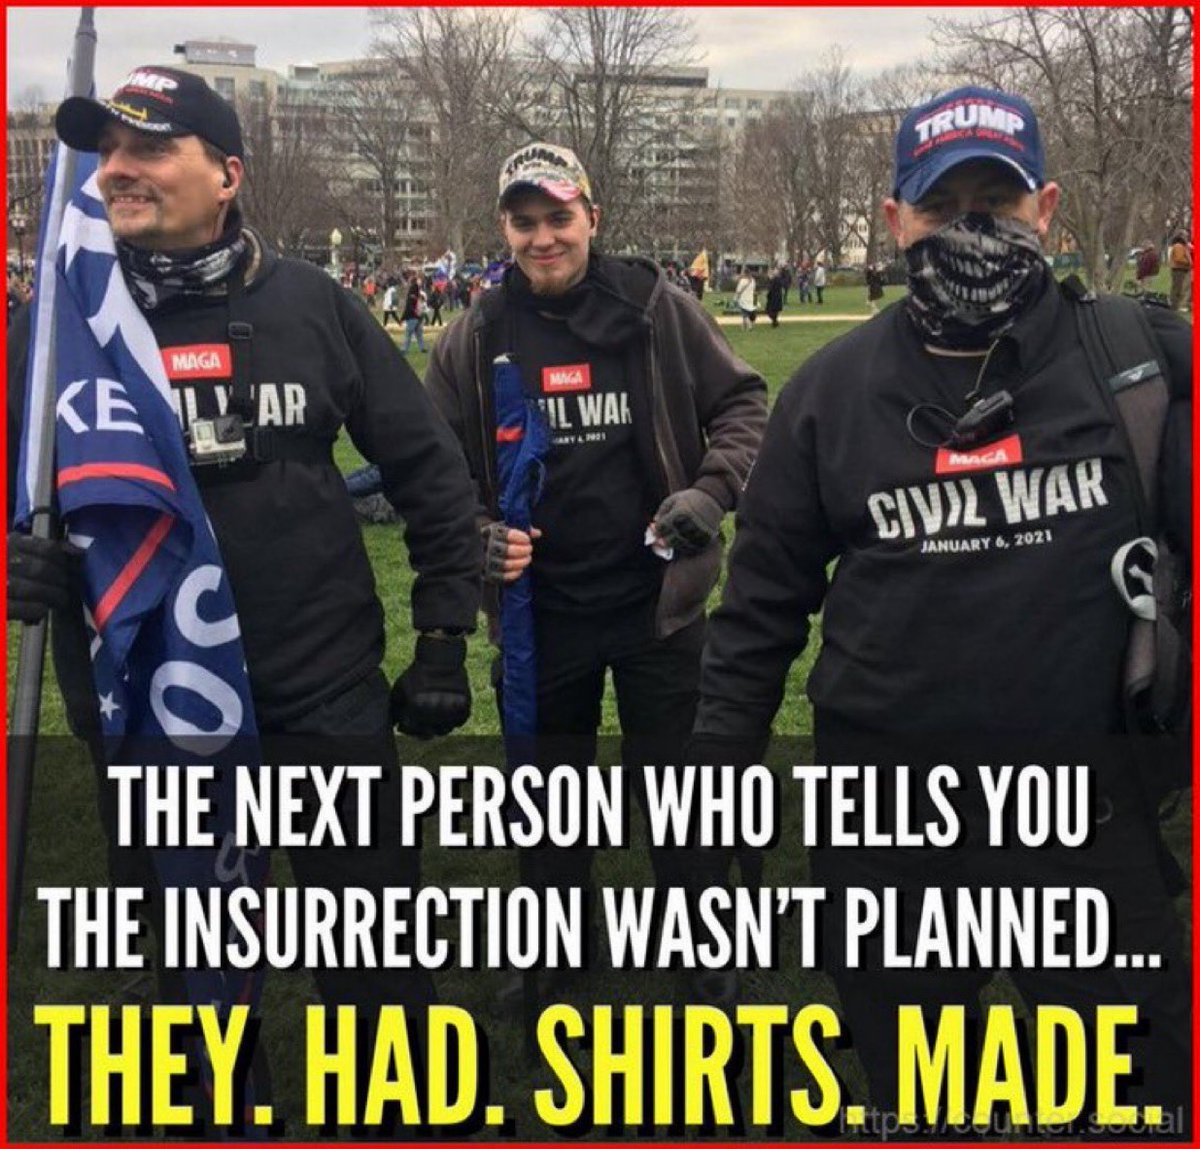 As more evidence surfaces about the planning of the insurrection on January 6th, don't let anyone convince you it wasn't a conspiracy to thwart the peaceful transfer of power + that trump planned it. #TraitorsSupportTraitorTrump #DemVoice1 #ProudBlue #wtpEARTH #Rabbithole